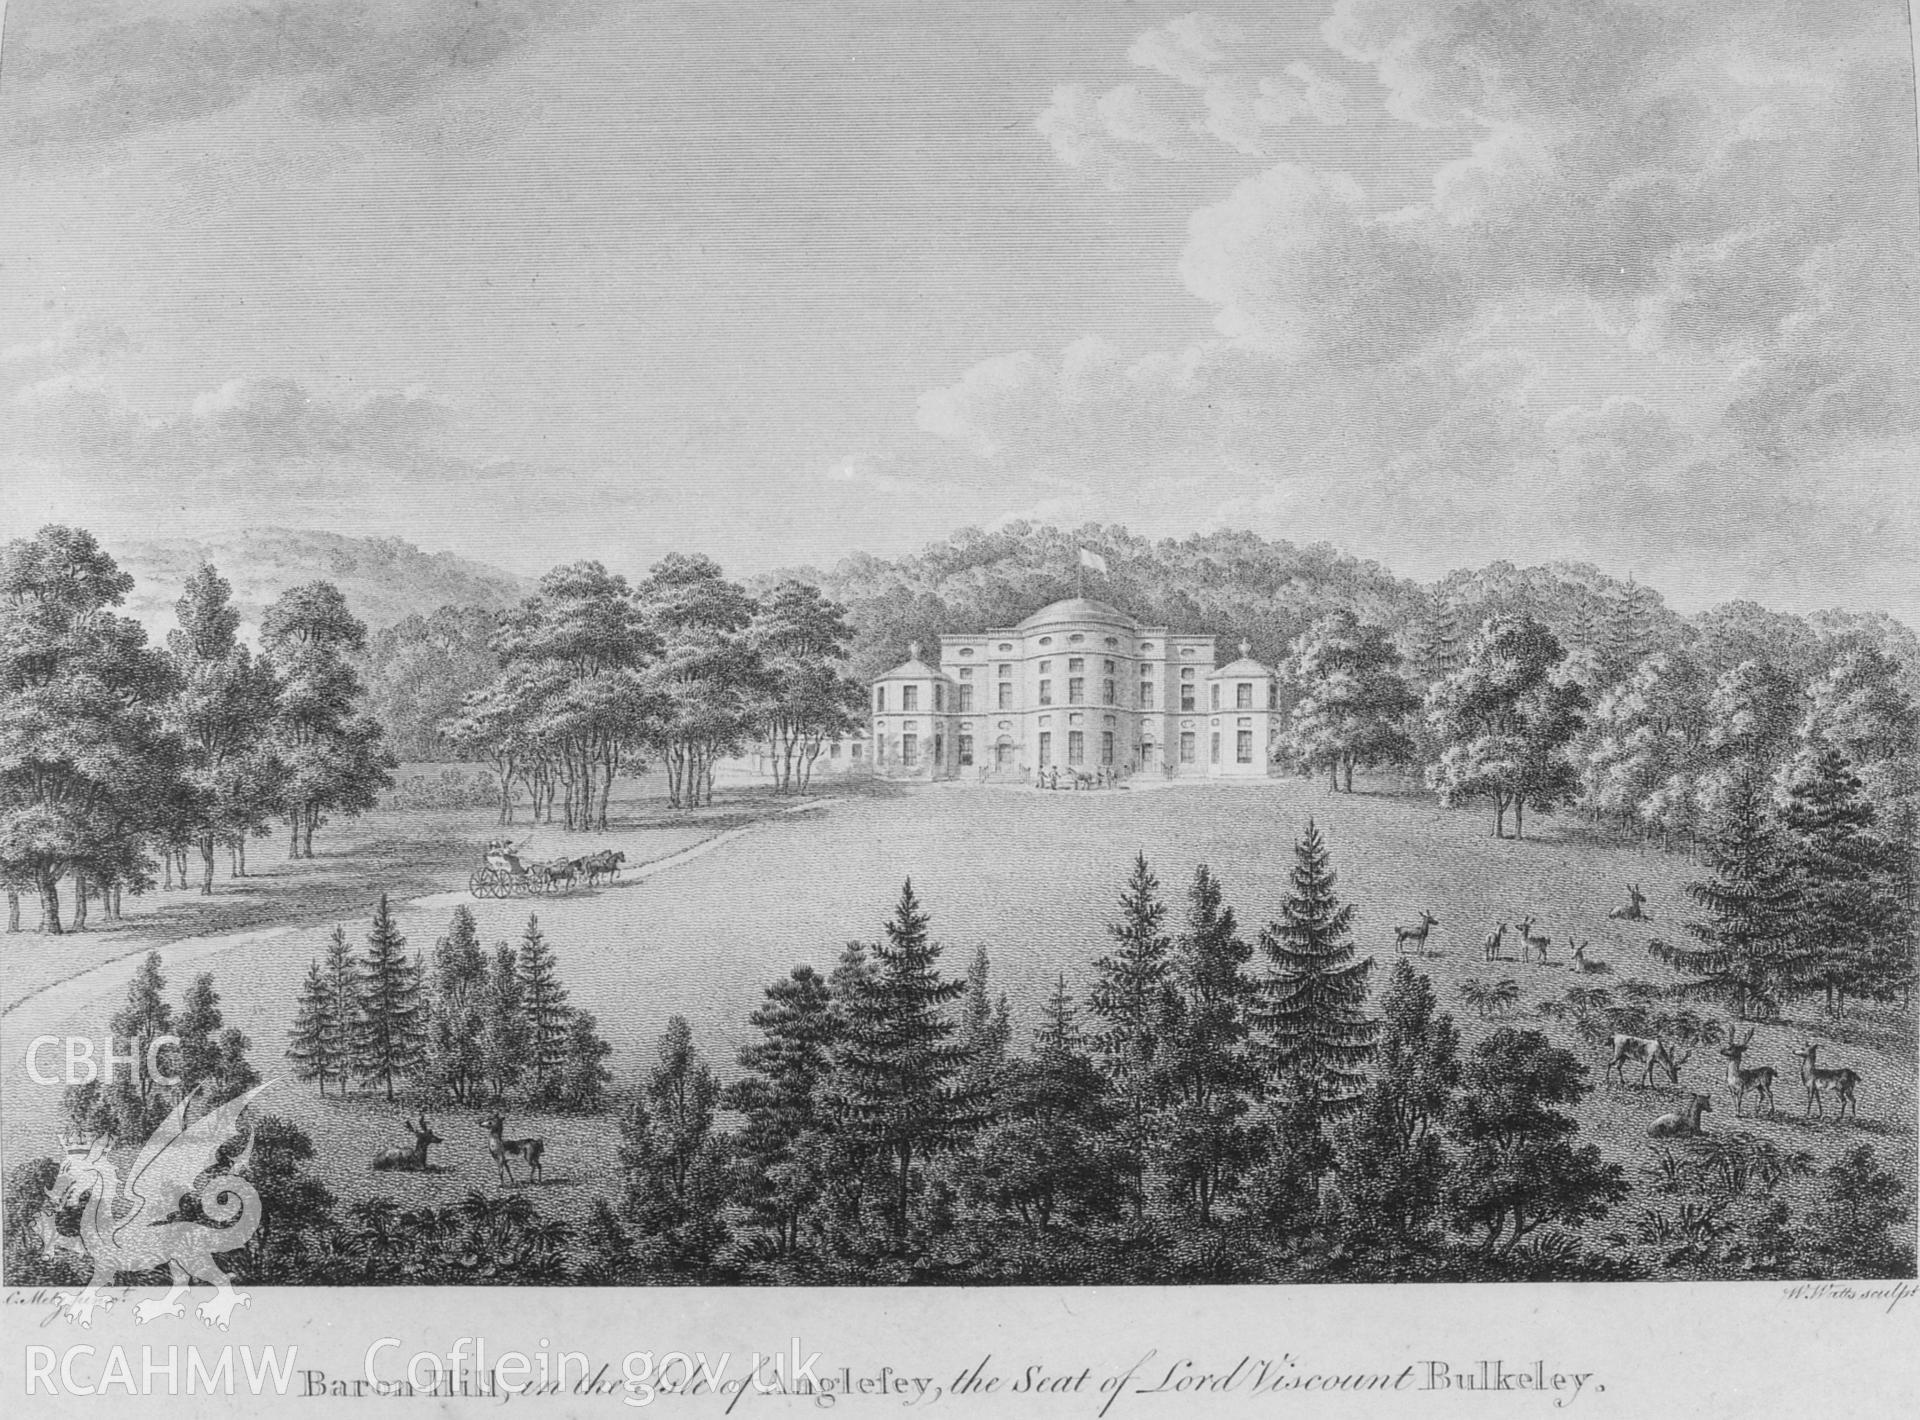 Black and white print showing exterior of Baron Hill, Beaumaris, copied from a postcard loaned by Thomas Lloyd.